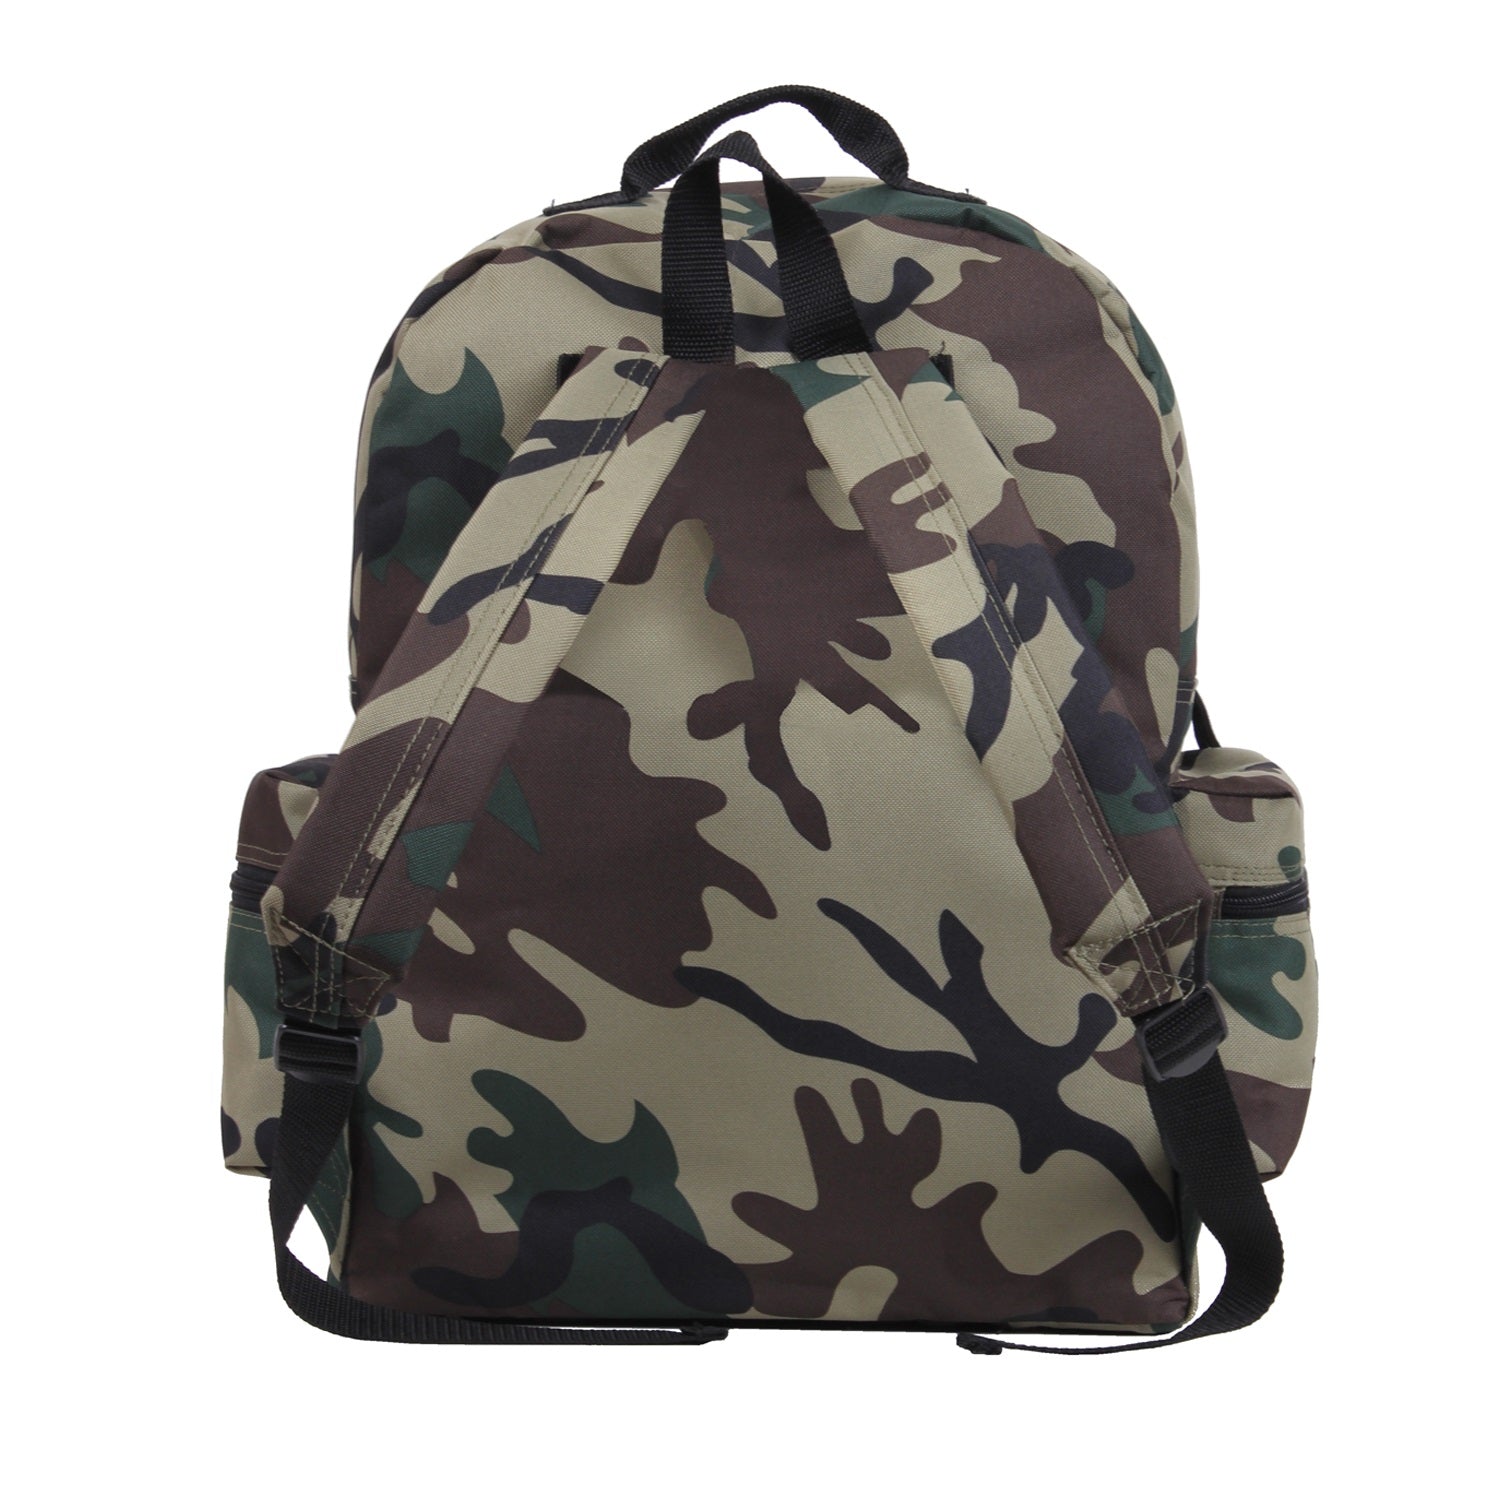 Rothco Deluxe Day Pack Woodland Camo